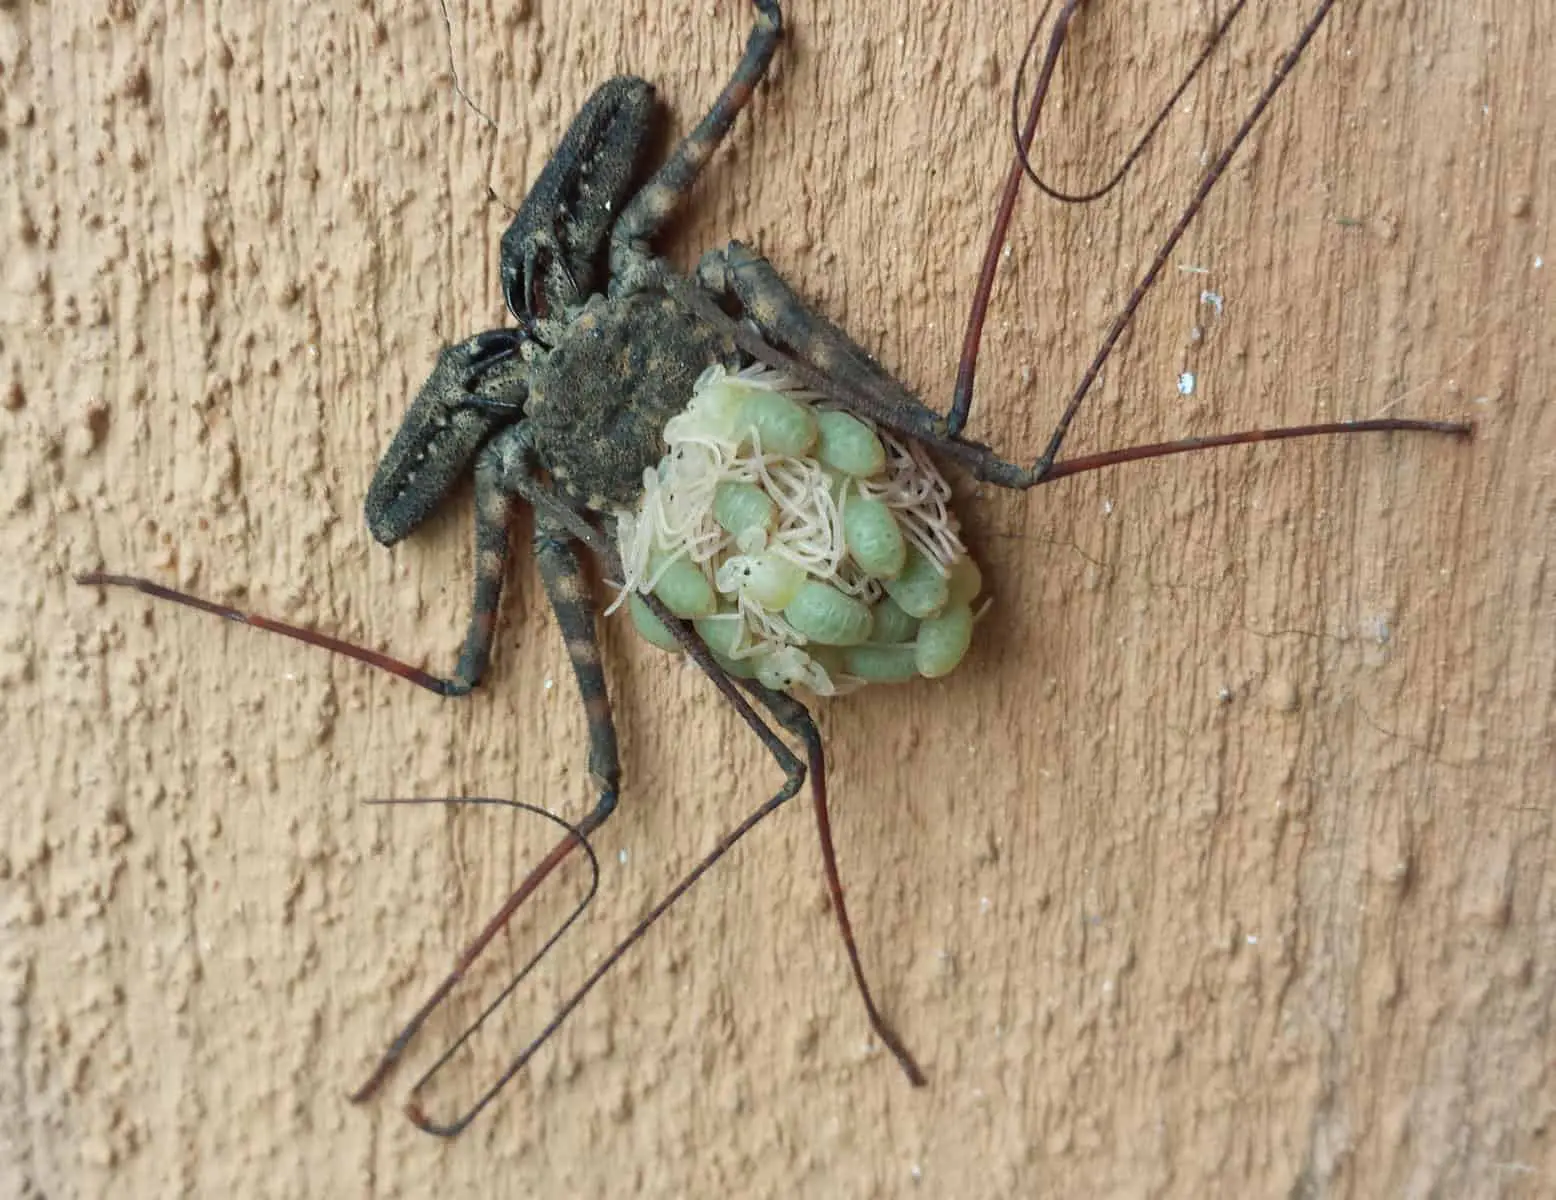 Tailless Whip Scorpion with young baby